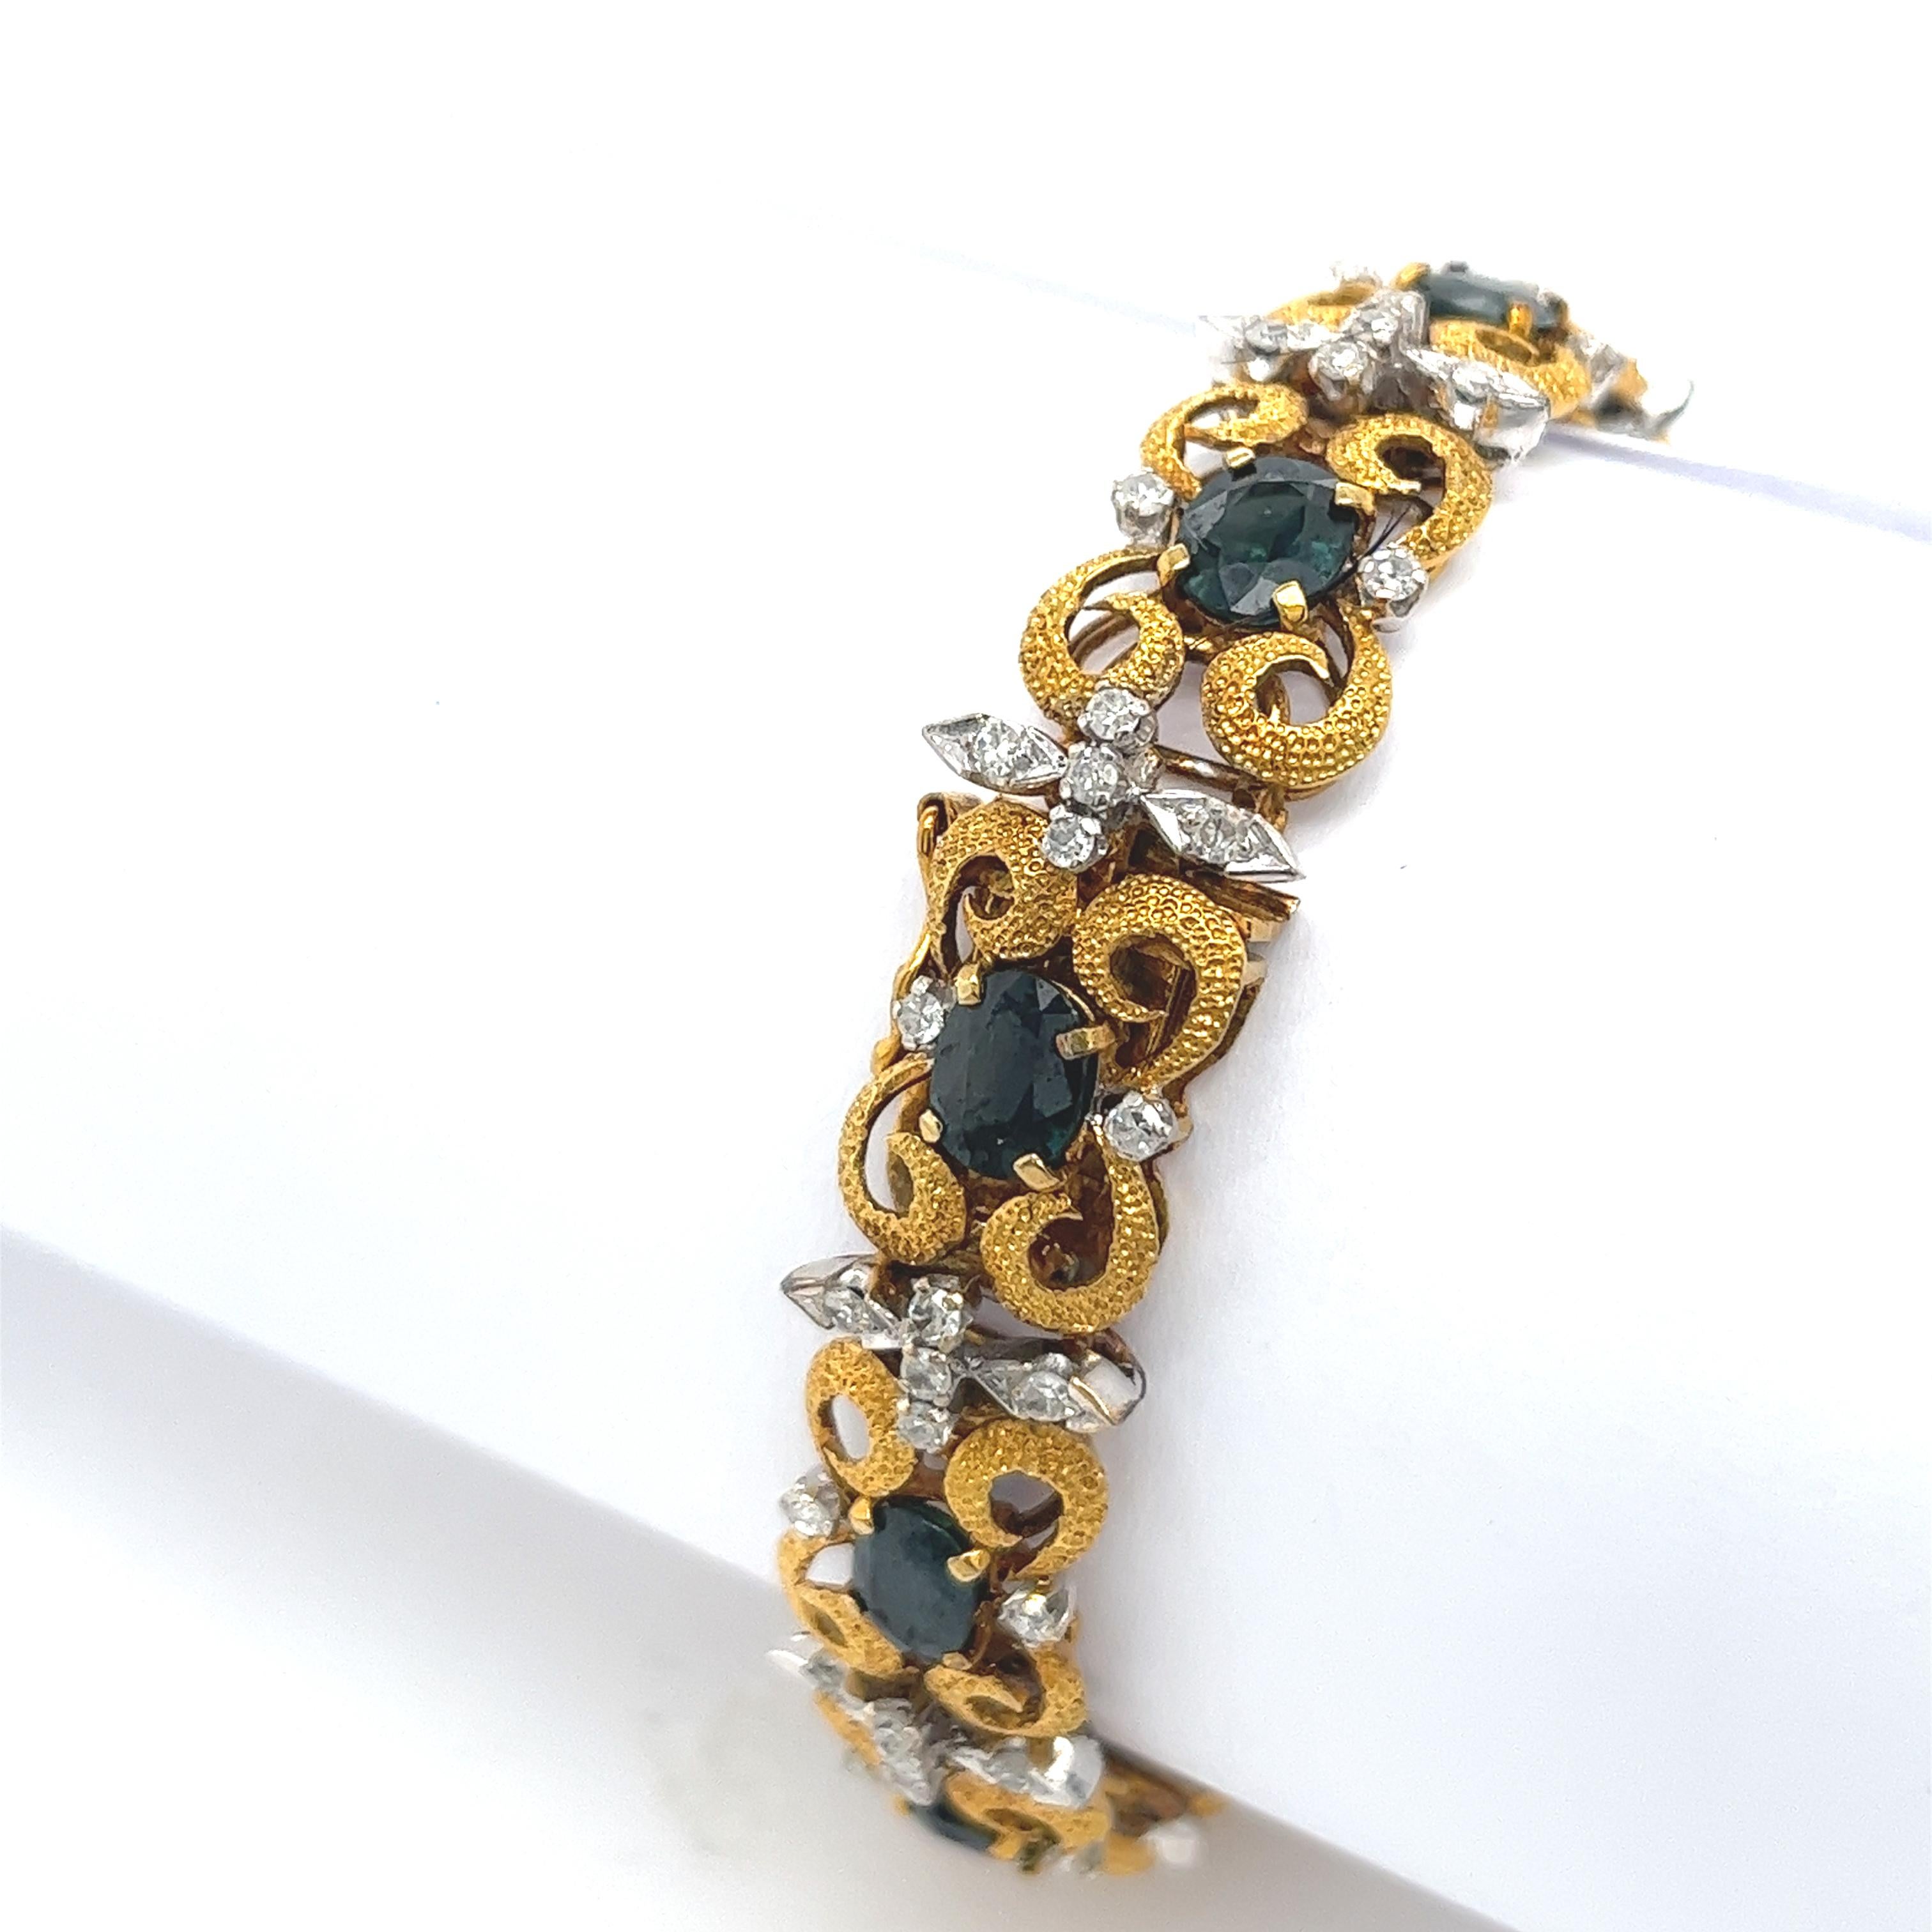 A beautiful vintage sapphire bracelet, crafted in 14ct yellow gold and set with 1.20ct rose-cut diamonds and 10 oval natural sapphires, 7.50ct. It is a timeless piece of jewellery, which you can wear day or night.
Item Length: 7